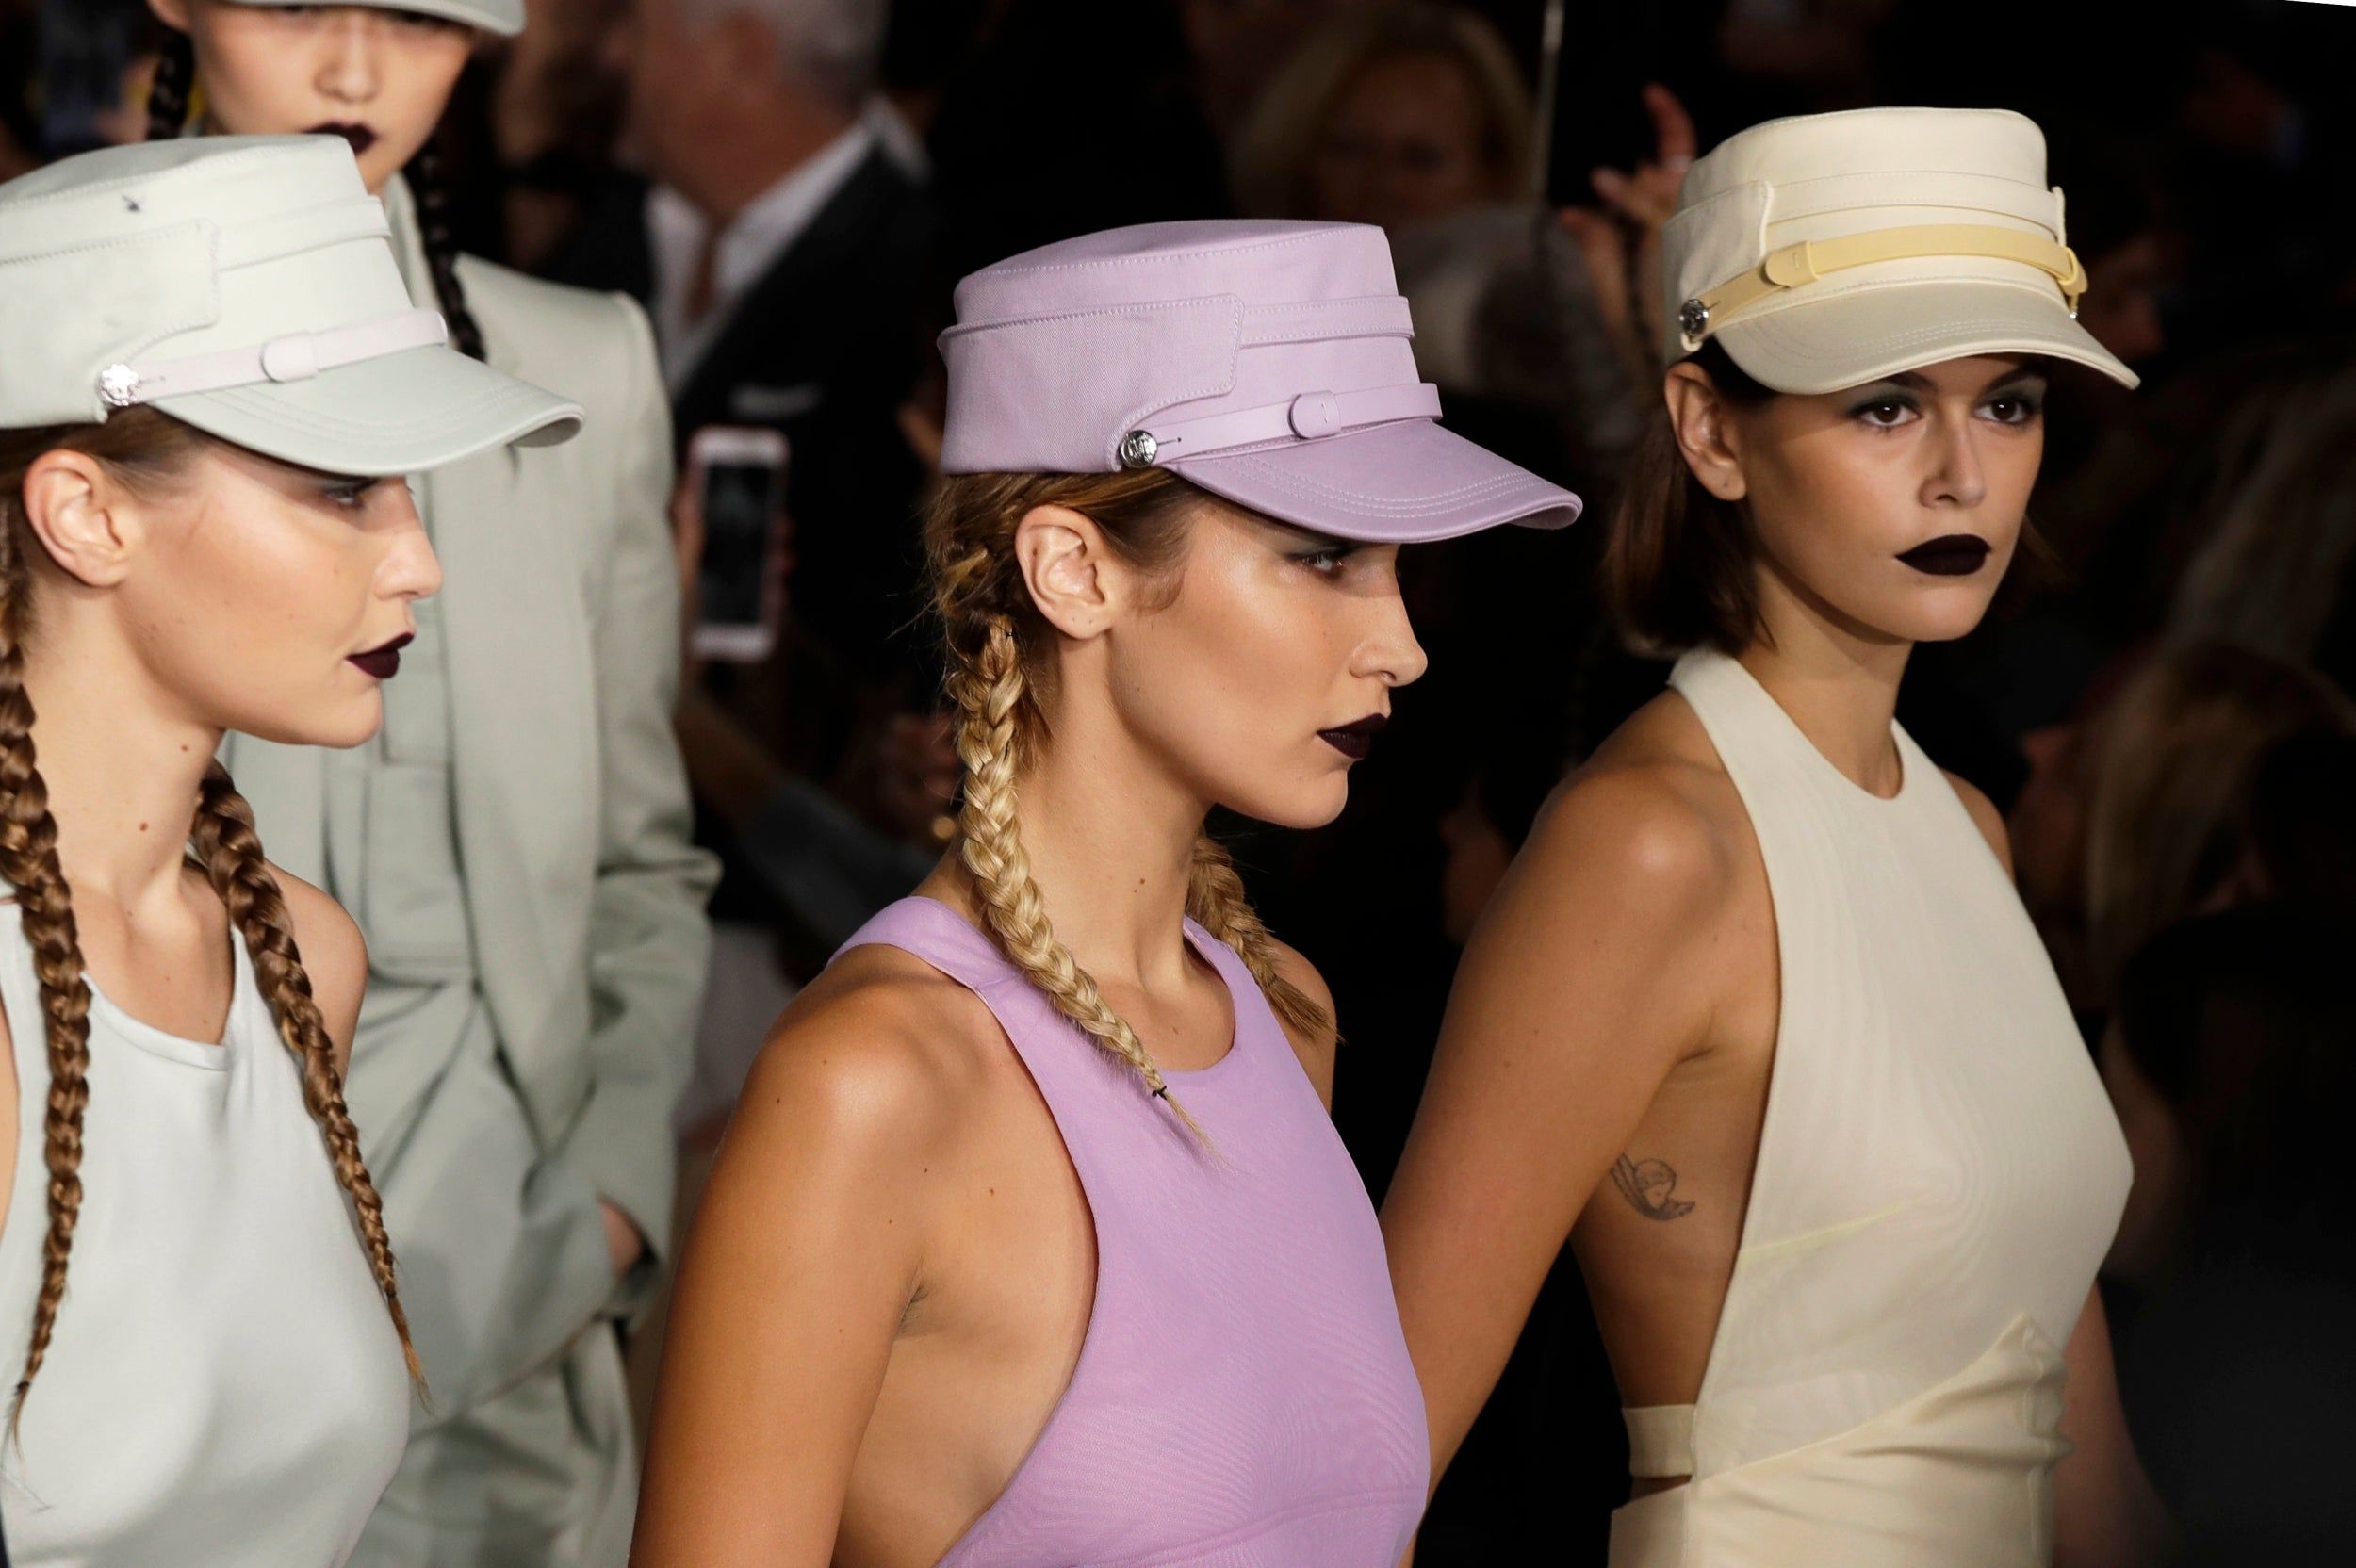 These beauty trends caught our eye during Milan Fashion Week